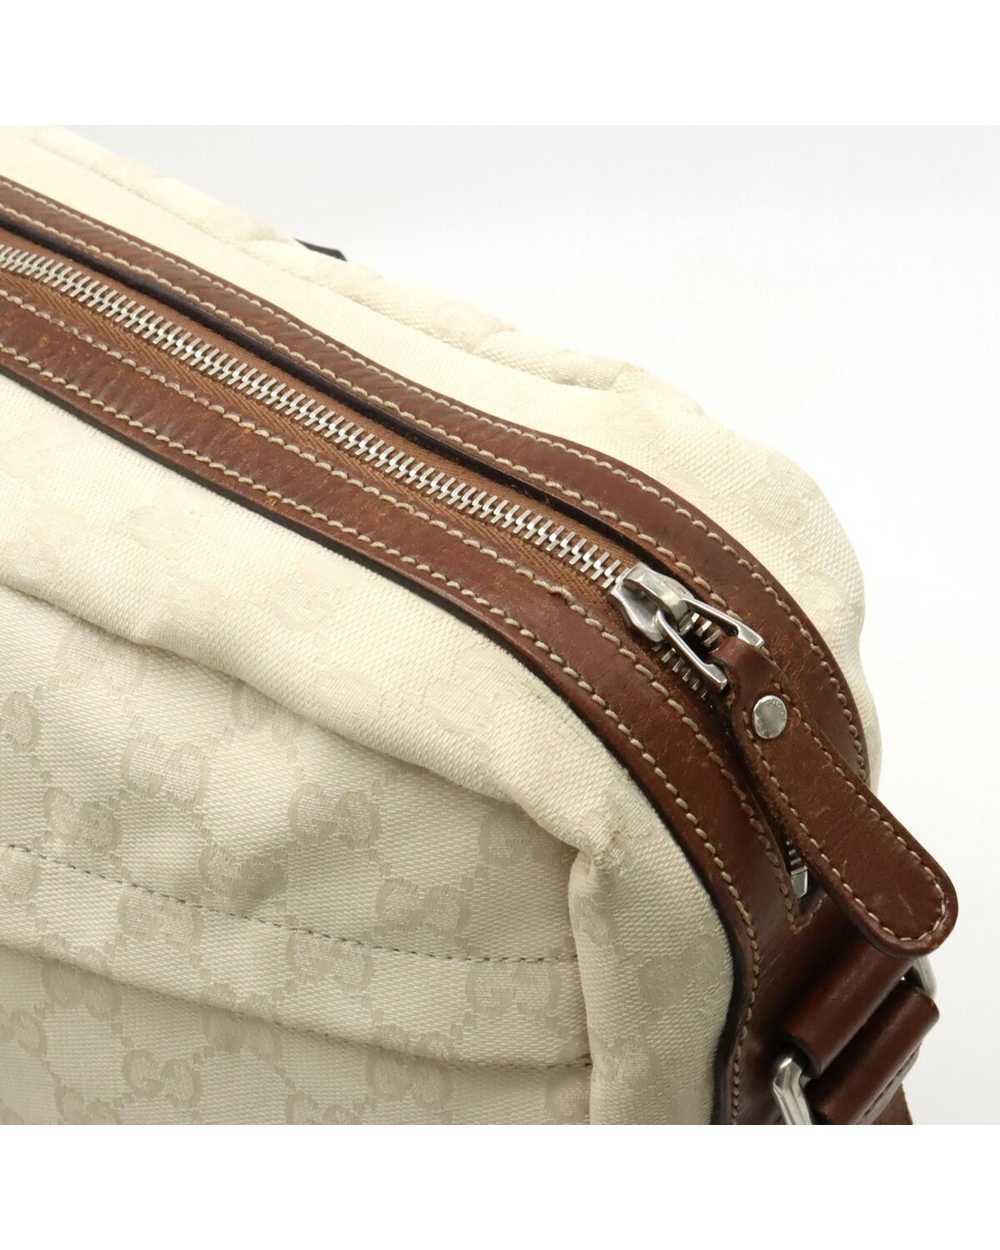 Gucci Canvas Shoulder Bag with Dust Bag by Luxury… - image 6